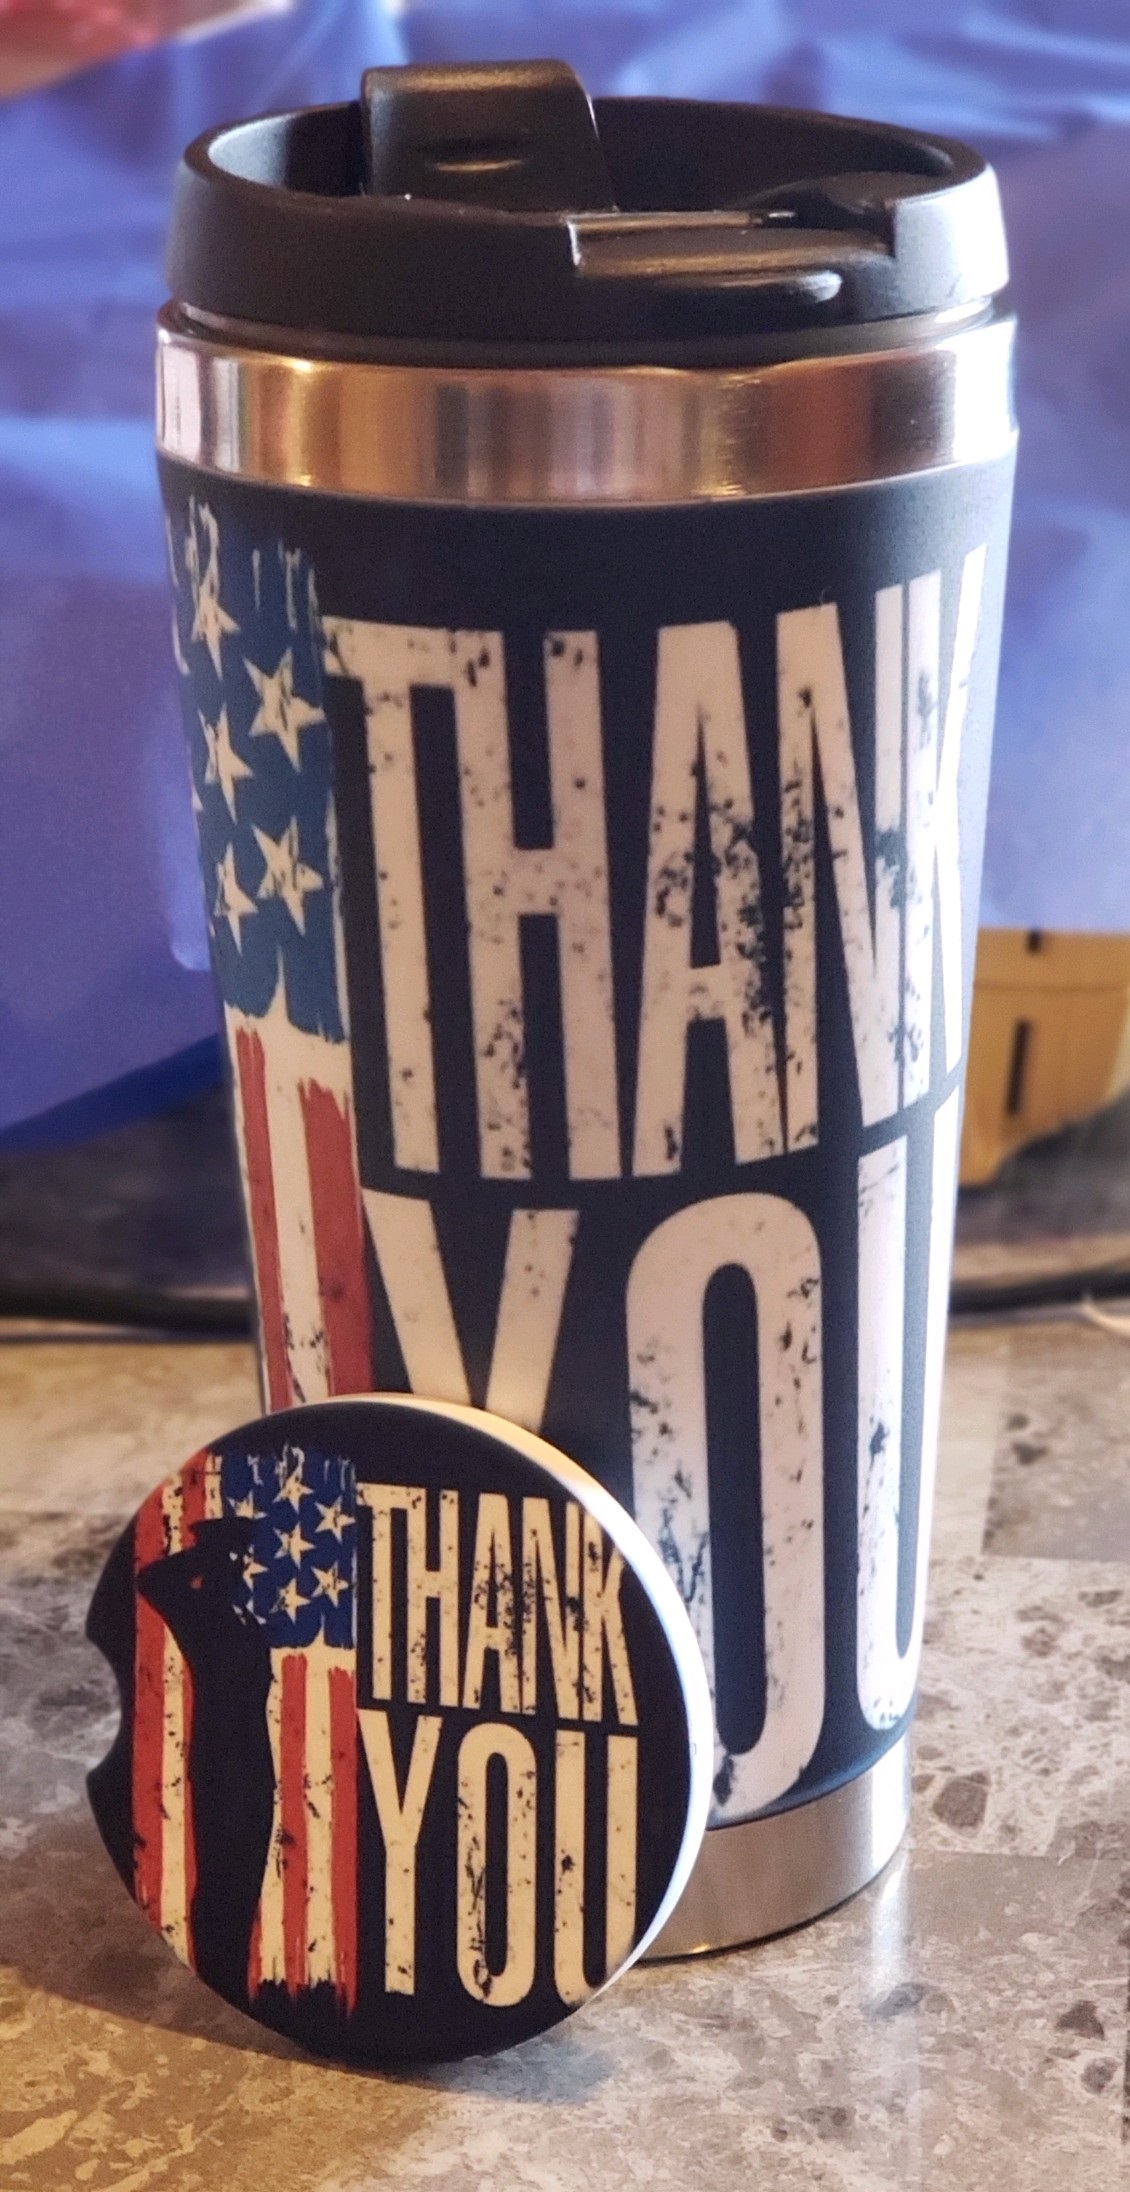 A tumbler and car coaster I made as a goodbye gift for an Officer I work with.